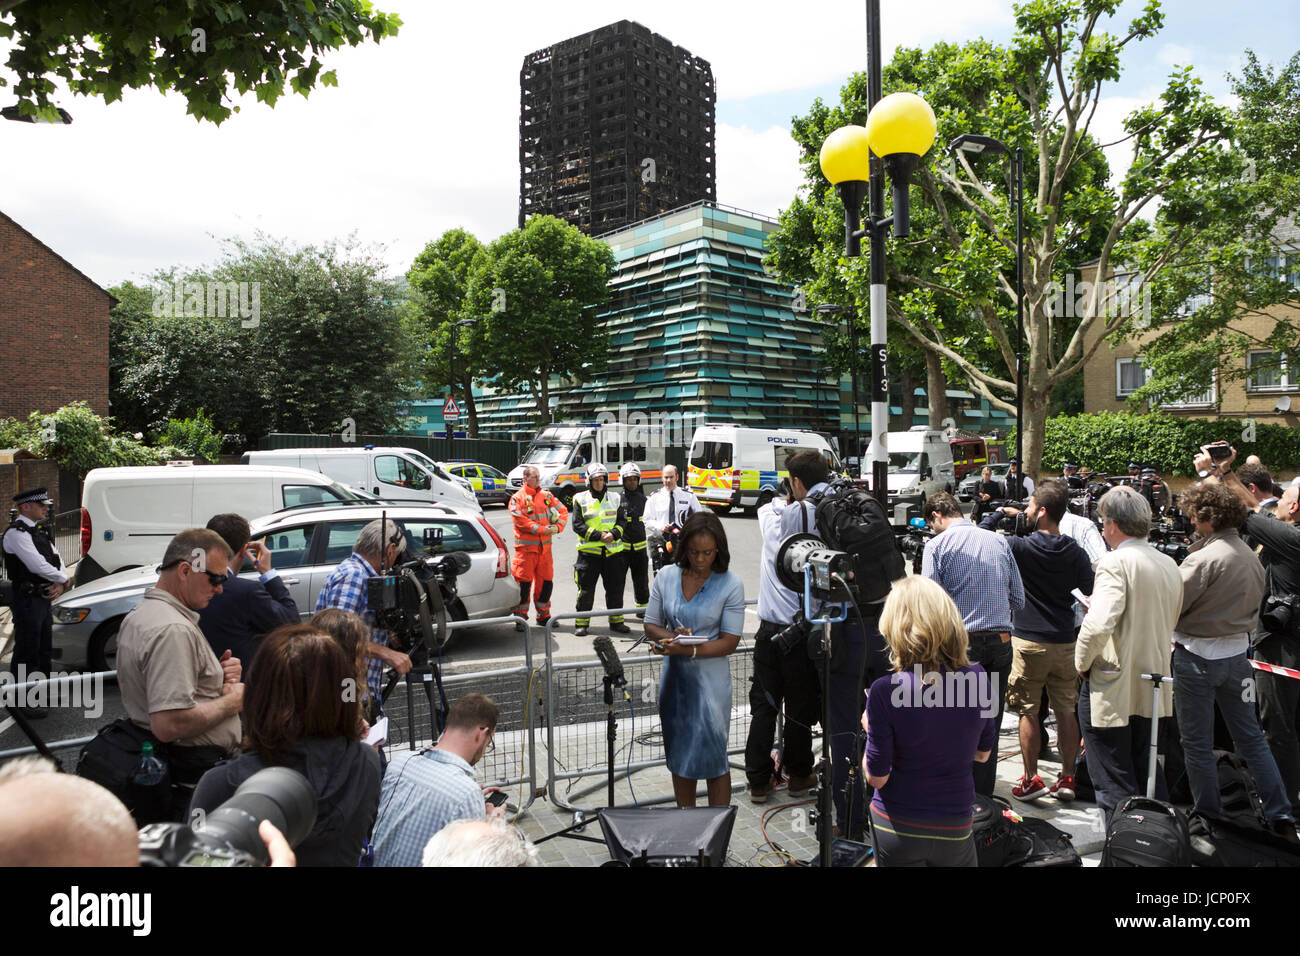 London, UK. 16th June, 2017. The Grenfell Tower Disaster, in West London. A 24 story residential building destroyed by fire. News media await latest news from the police and fire brigade. Stock Photo